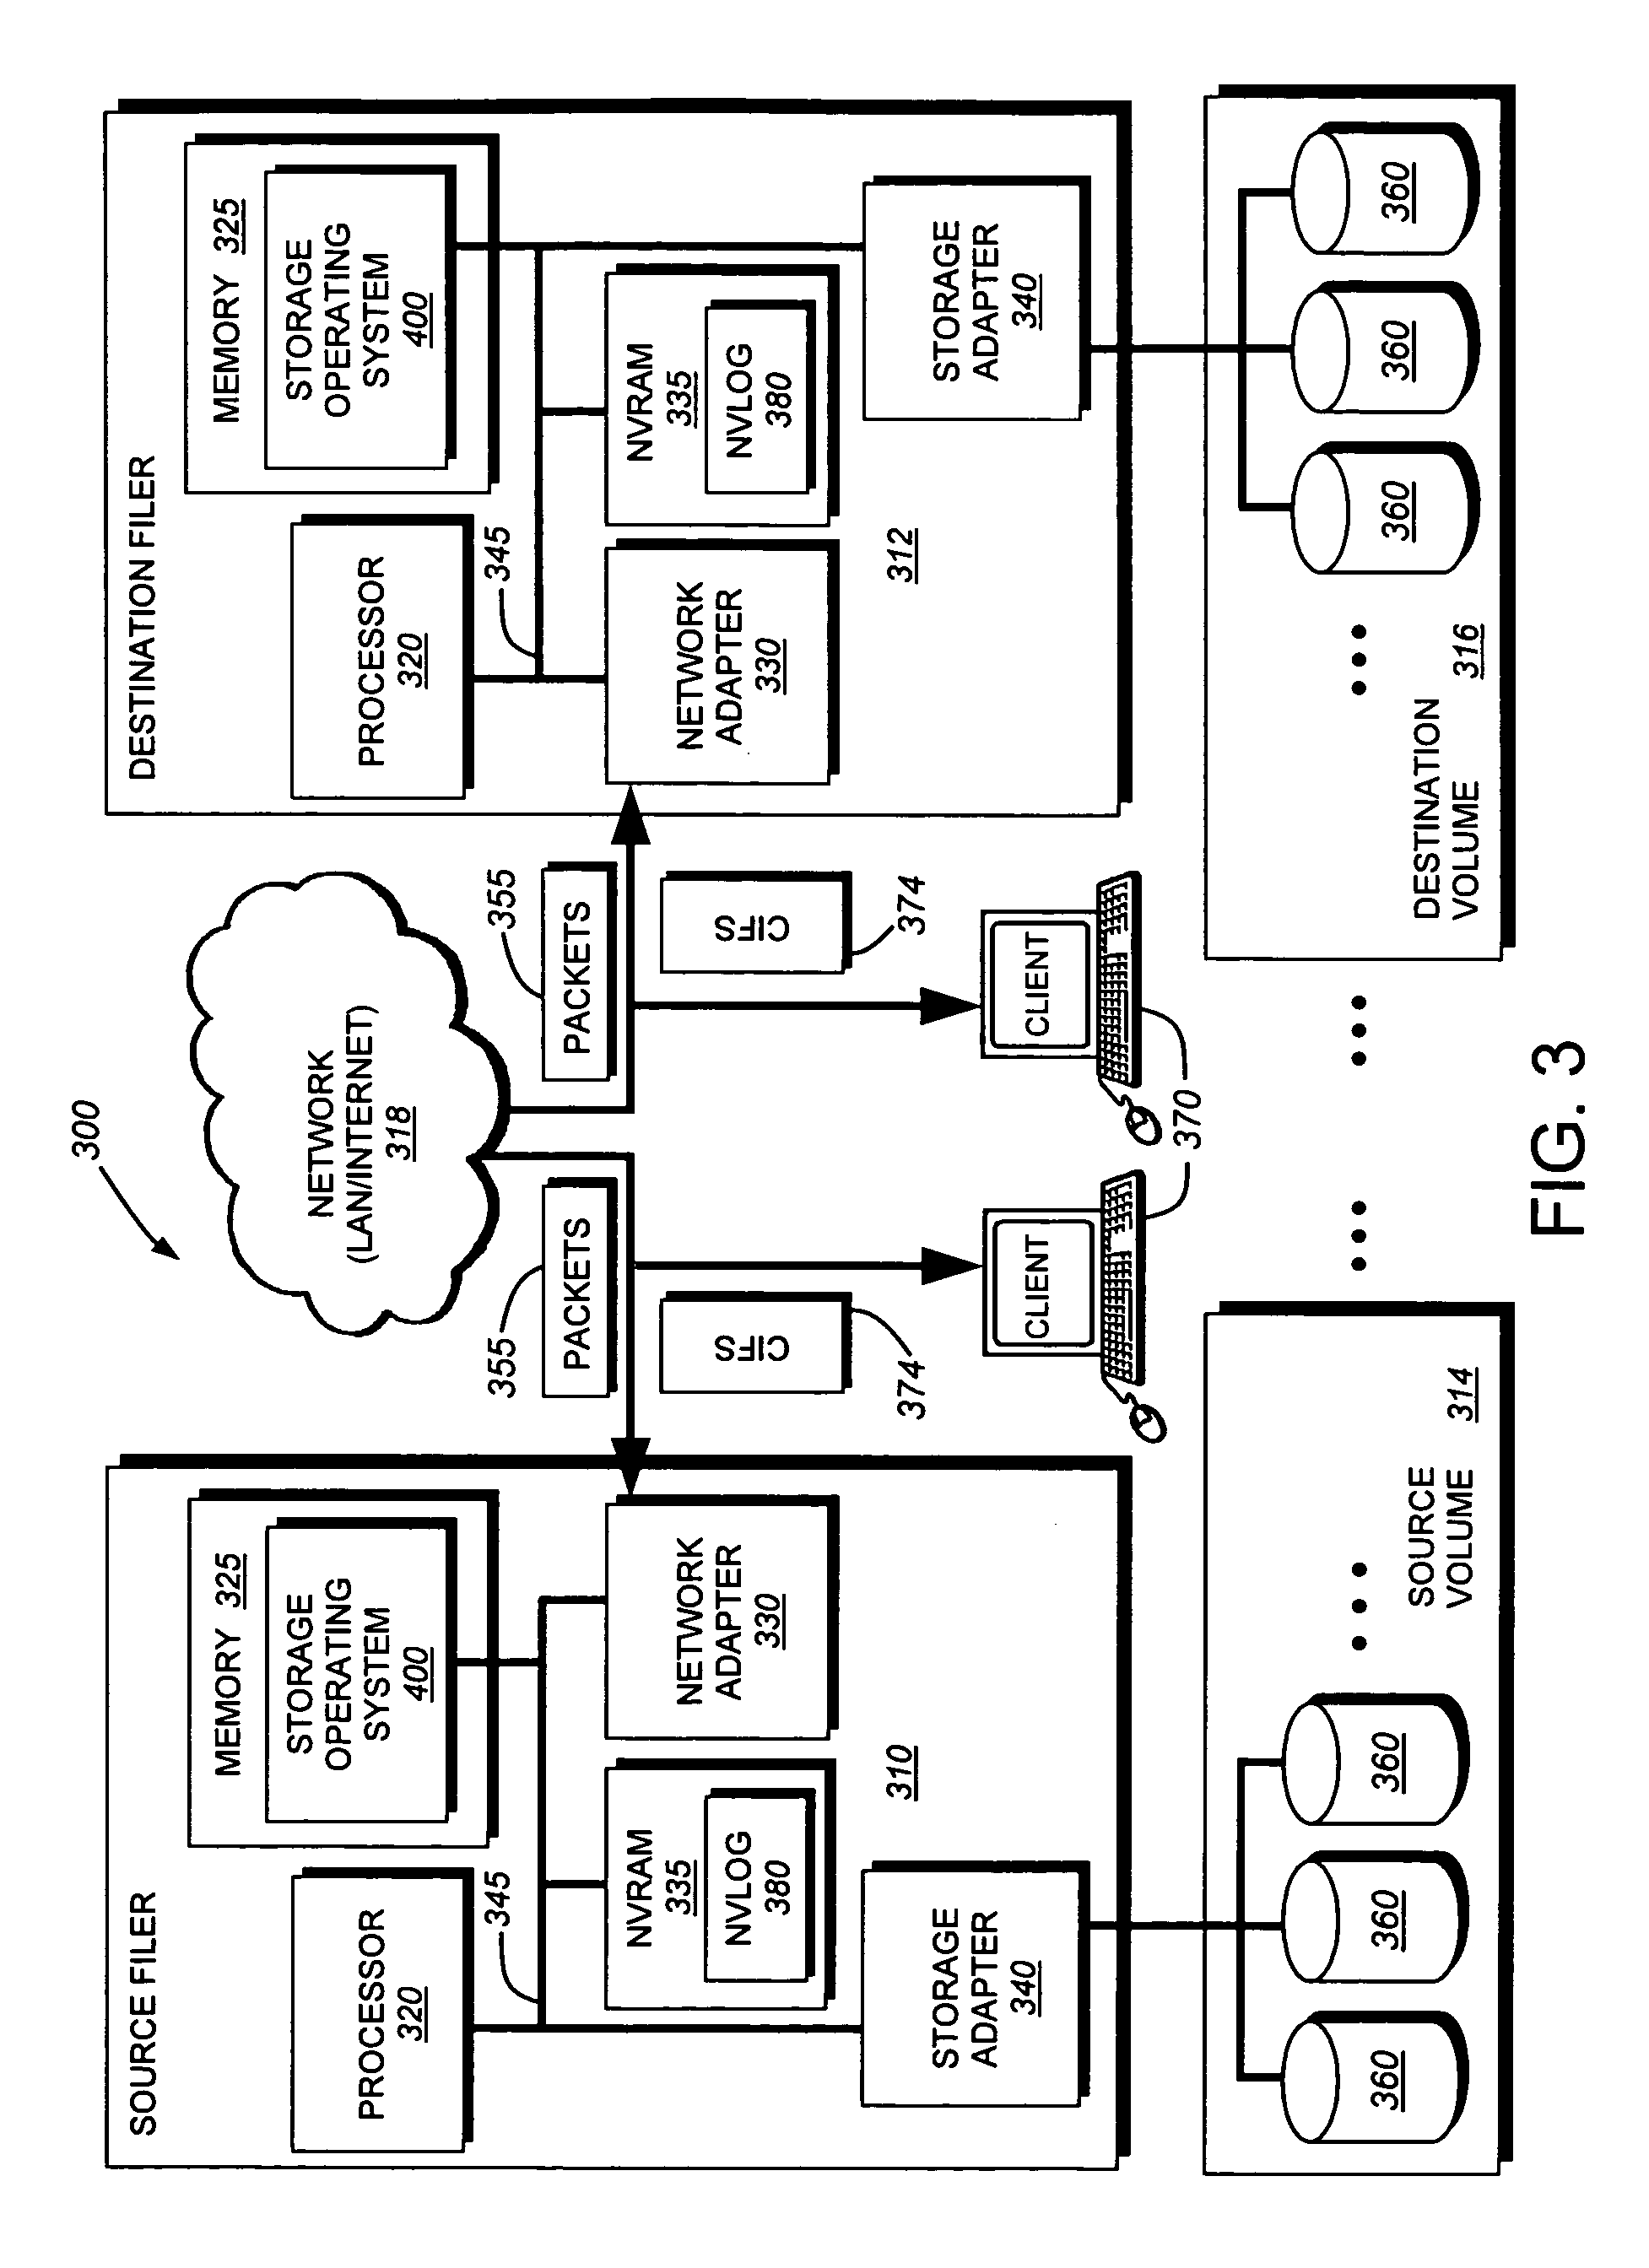 System and method for determining changes in two snapshots and for transmitting changes to destination snapshot